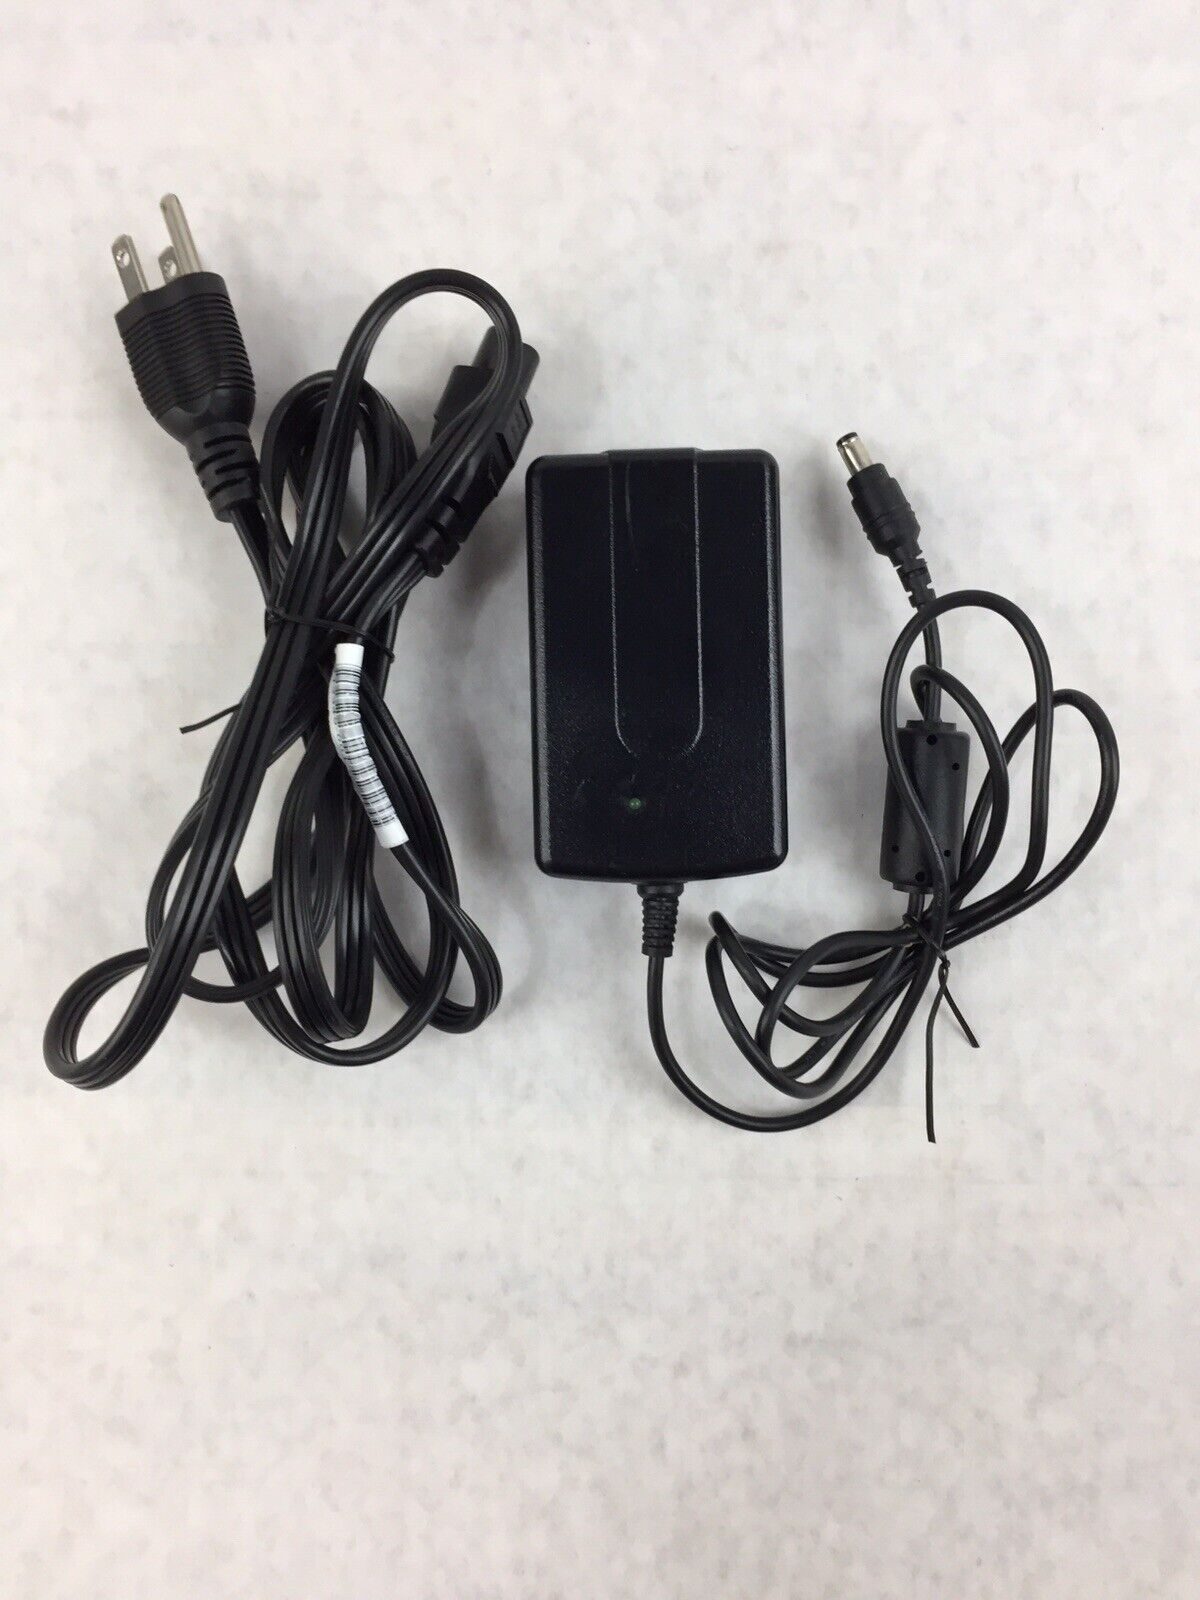 AC ADAPTER CHARGER 120VAC to 12VDC 5A LSE9802A1255 with Power Cord